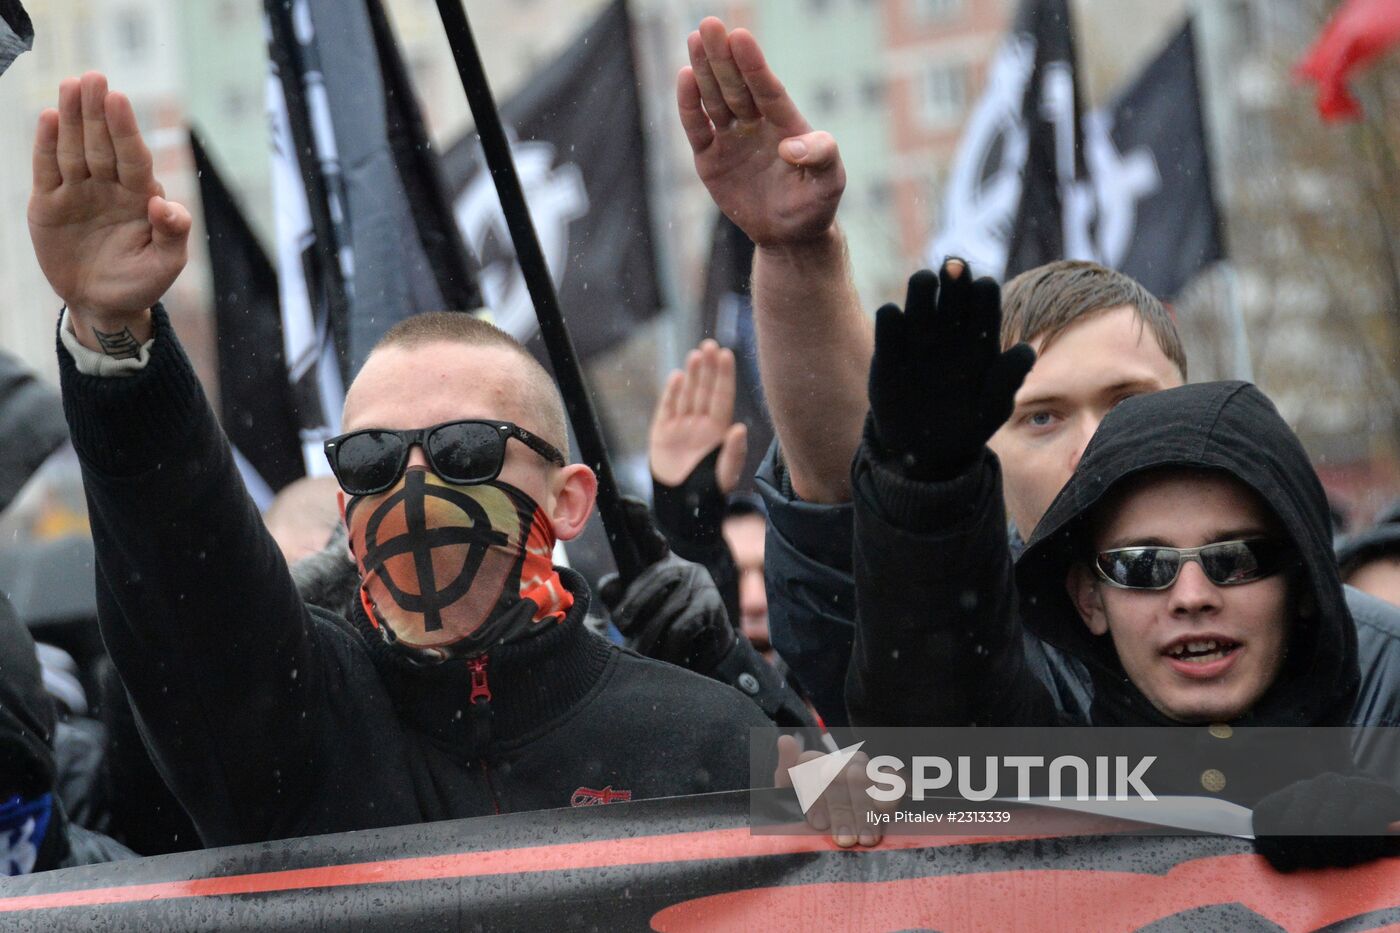 "Russian March-2013" in Moscow